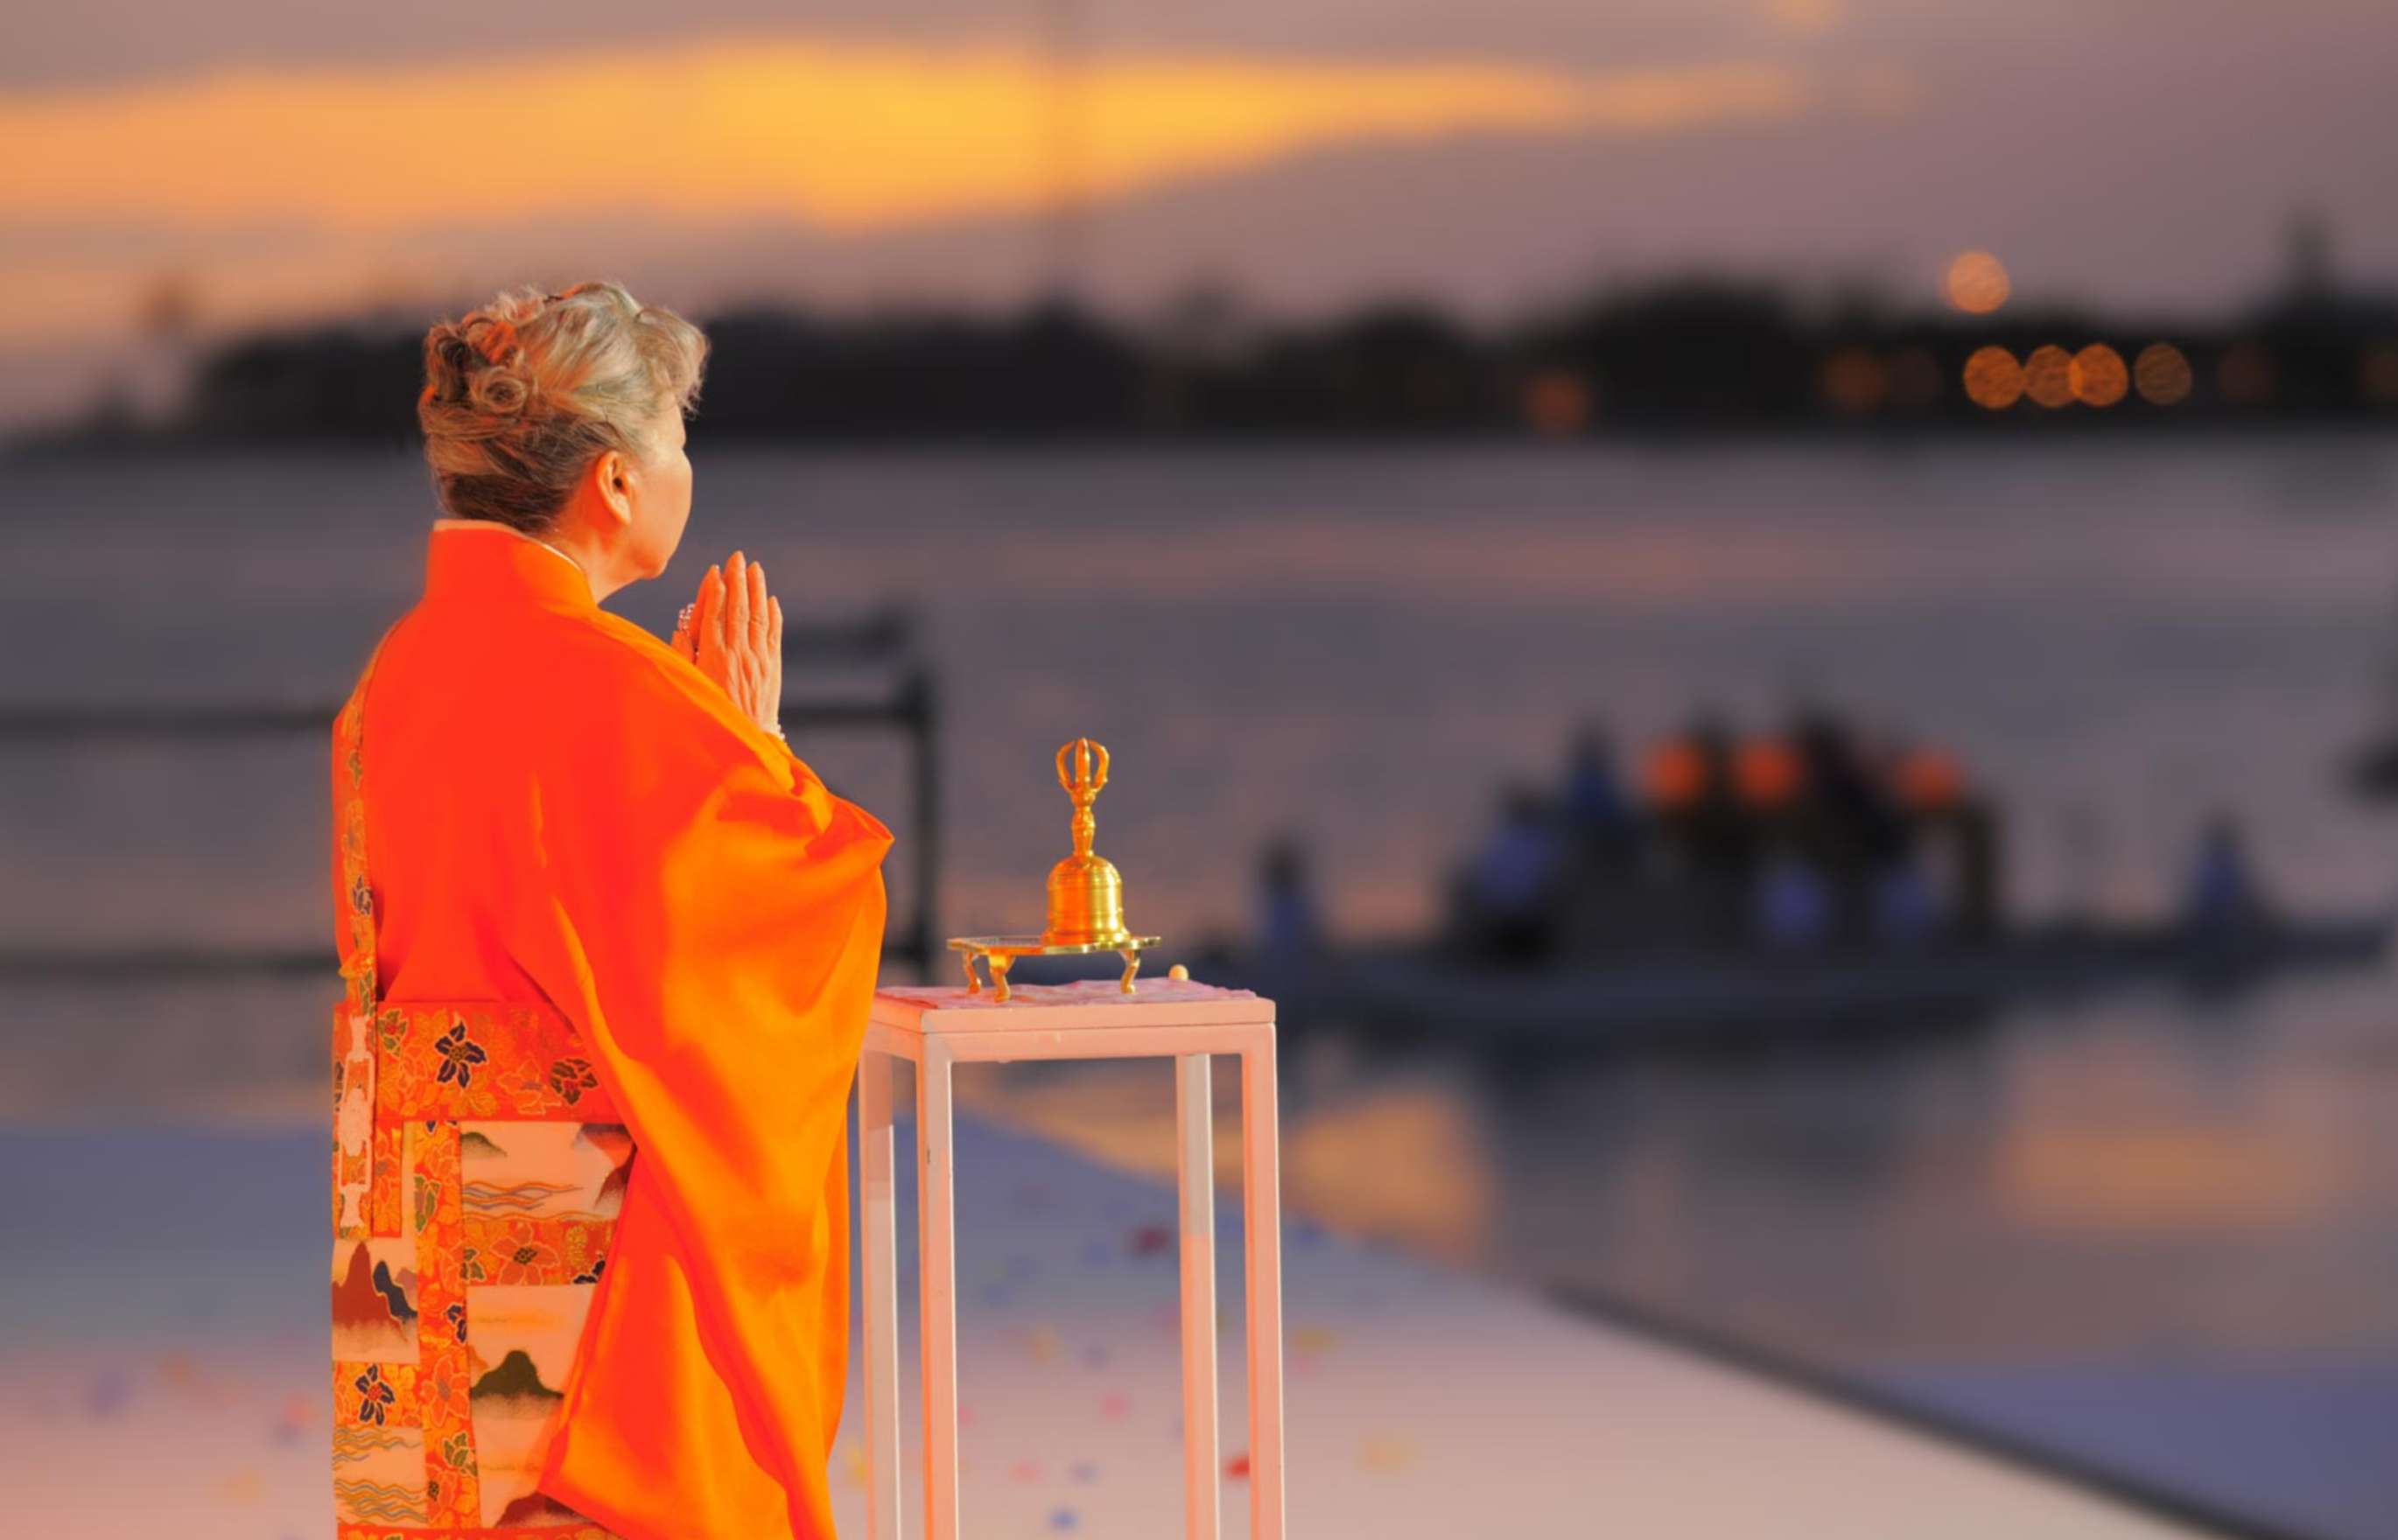 Her Holiness Shinso Ito, in bright orange robes, stands with her back to the camera before a plinth holding a ceremonial bell, her hands in gassho as she looks out over an ocean bay at sunset.